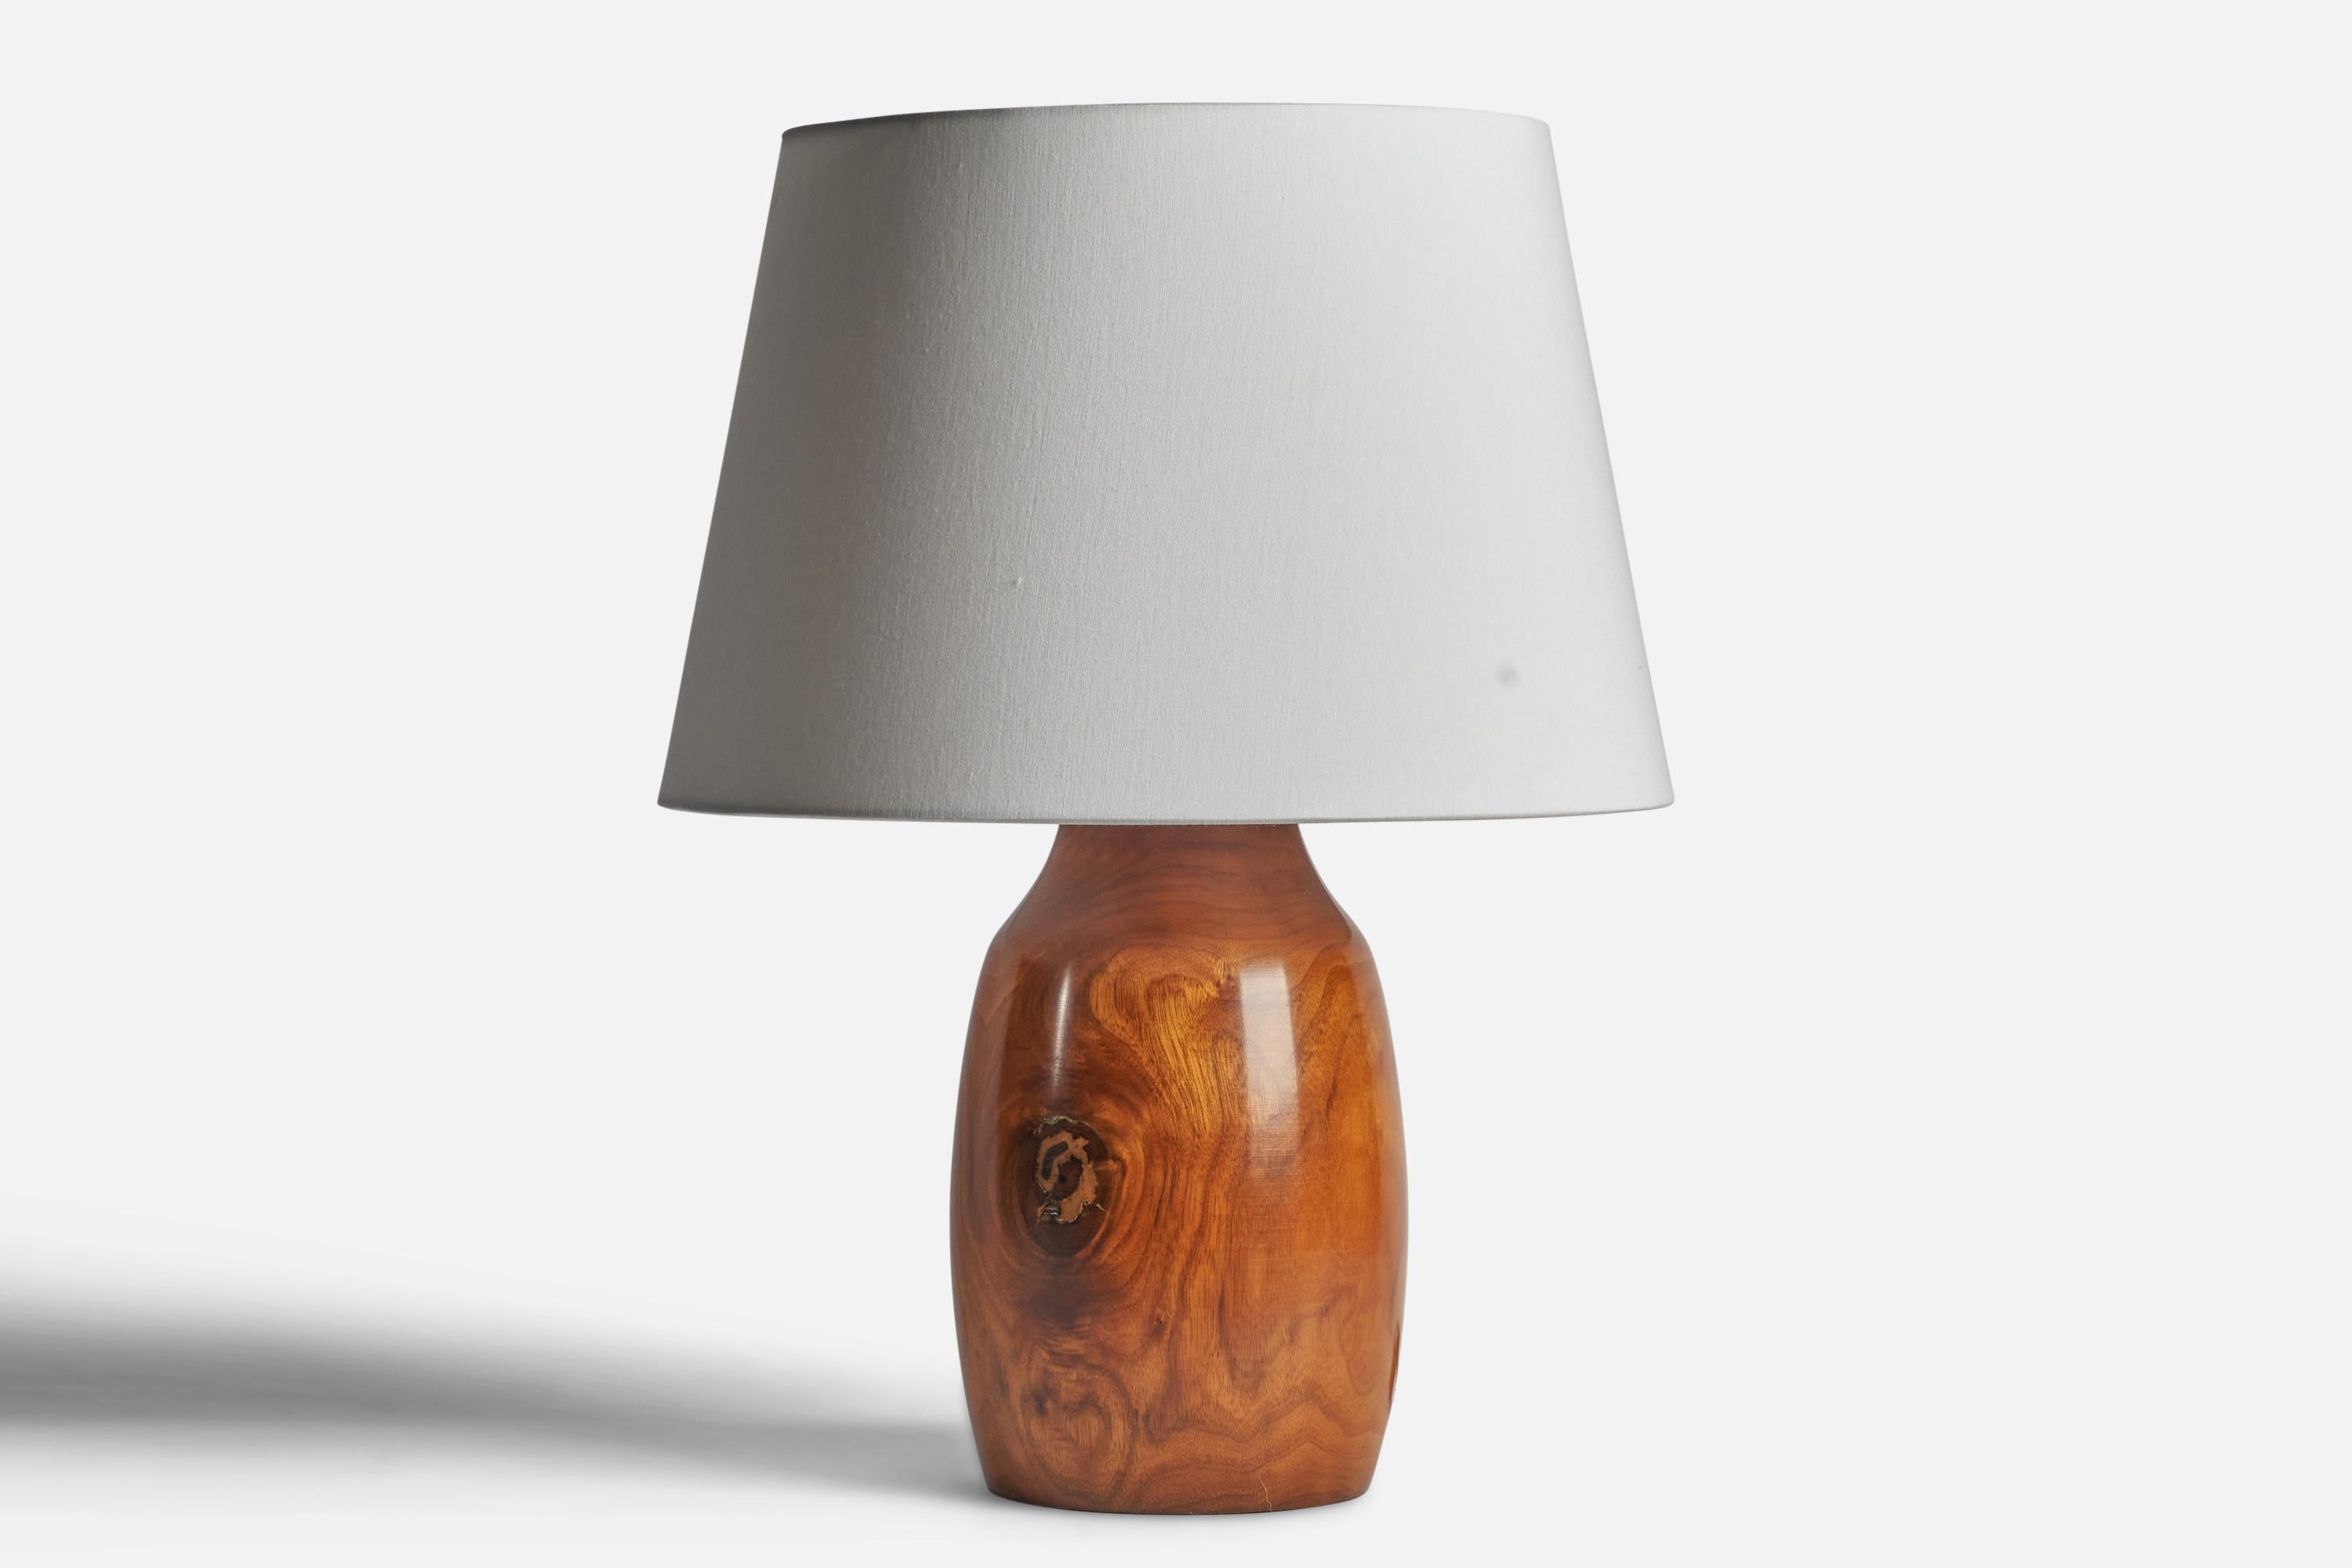 A wood table lamp designed and produced in the US, c. 1950s.

Dimensions of Lamp (inches): 16.75” H x 7.25” Diameter
Dimensions of Shade (inches): 12” Top Diameter x 16” Bottom Diameter x 11” H 
Dimensions of Lamp with Shade (inches): 22” H x 16”